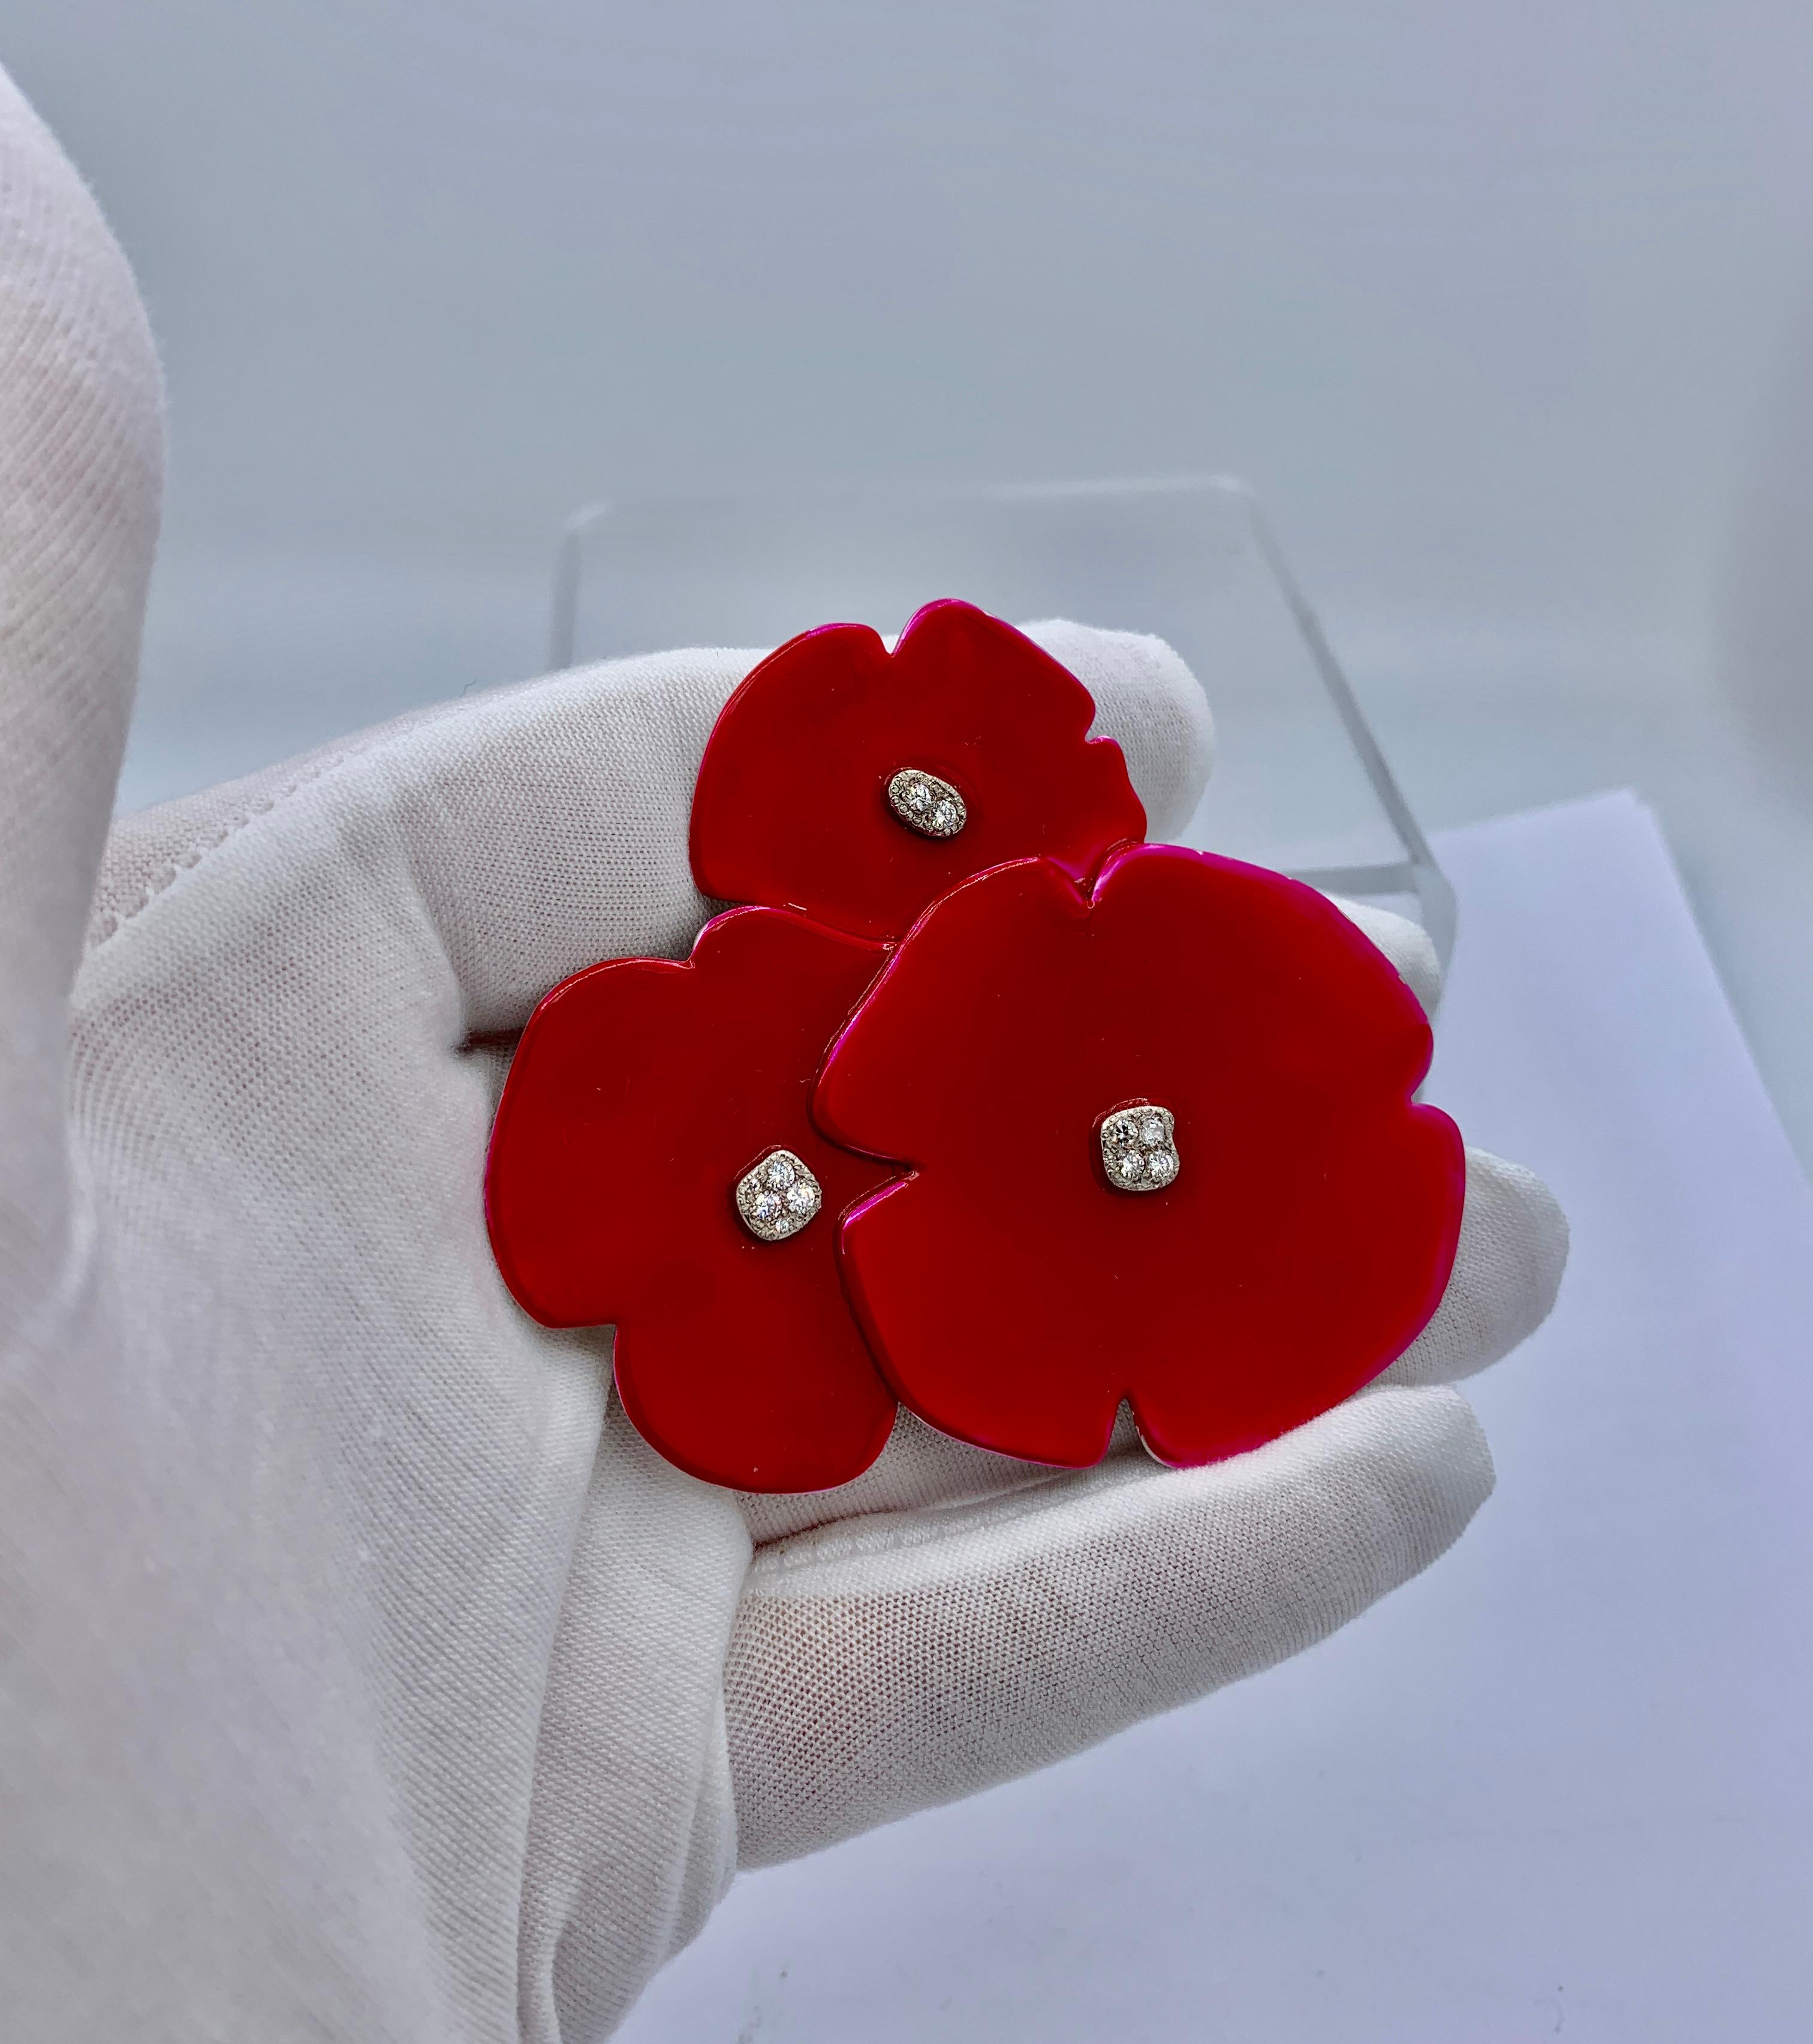 This is a fabulous large dramatic pendant or brooch of Poppy Flowers in red lacquer set with Diamonds in 14 Karat White Gold by Helen Blythe-Hart.  The poppies are a spectacular piece of original jewelry art sculpture by famed artist Helen